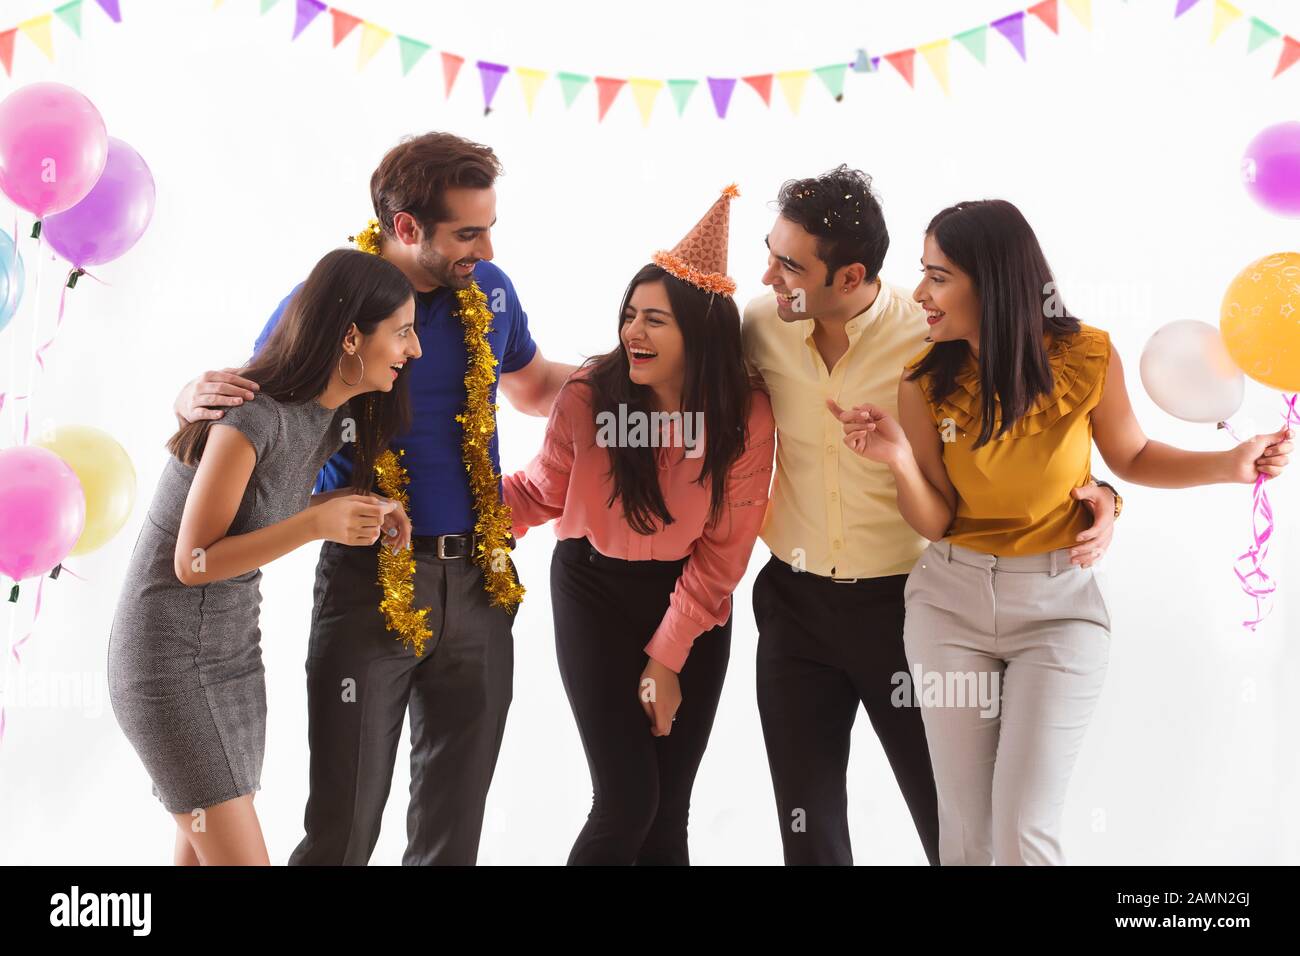 Friends having fun together at a party. Stock Photo